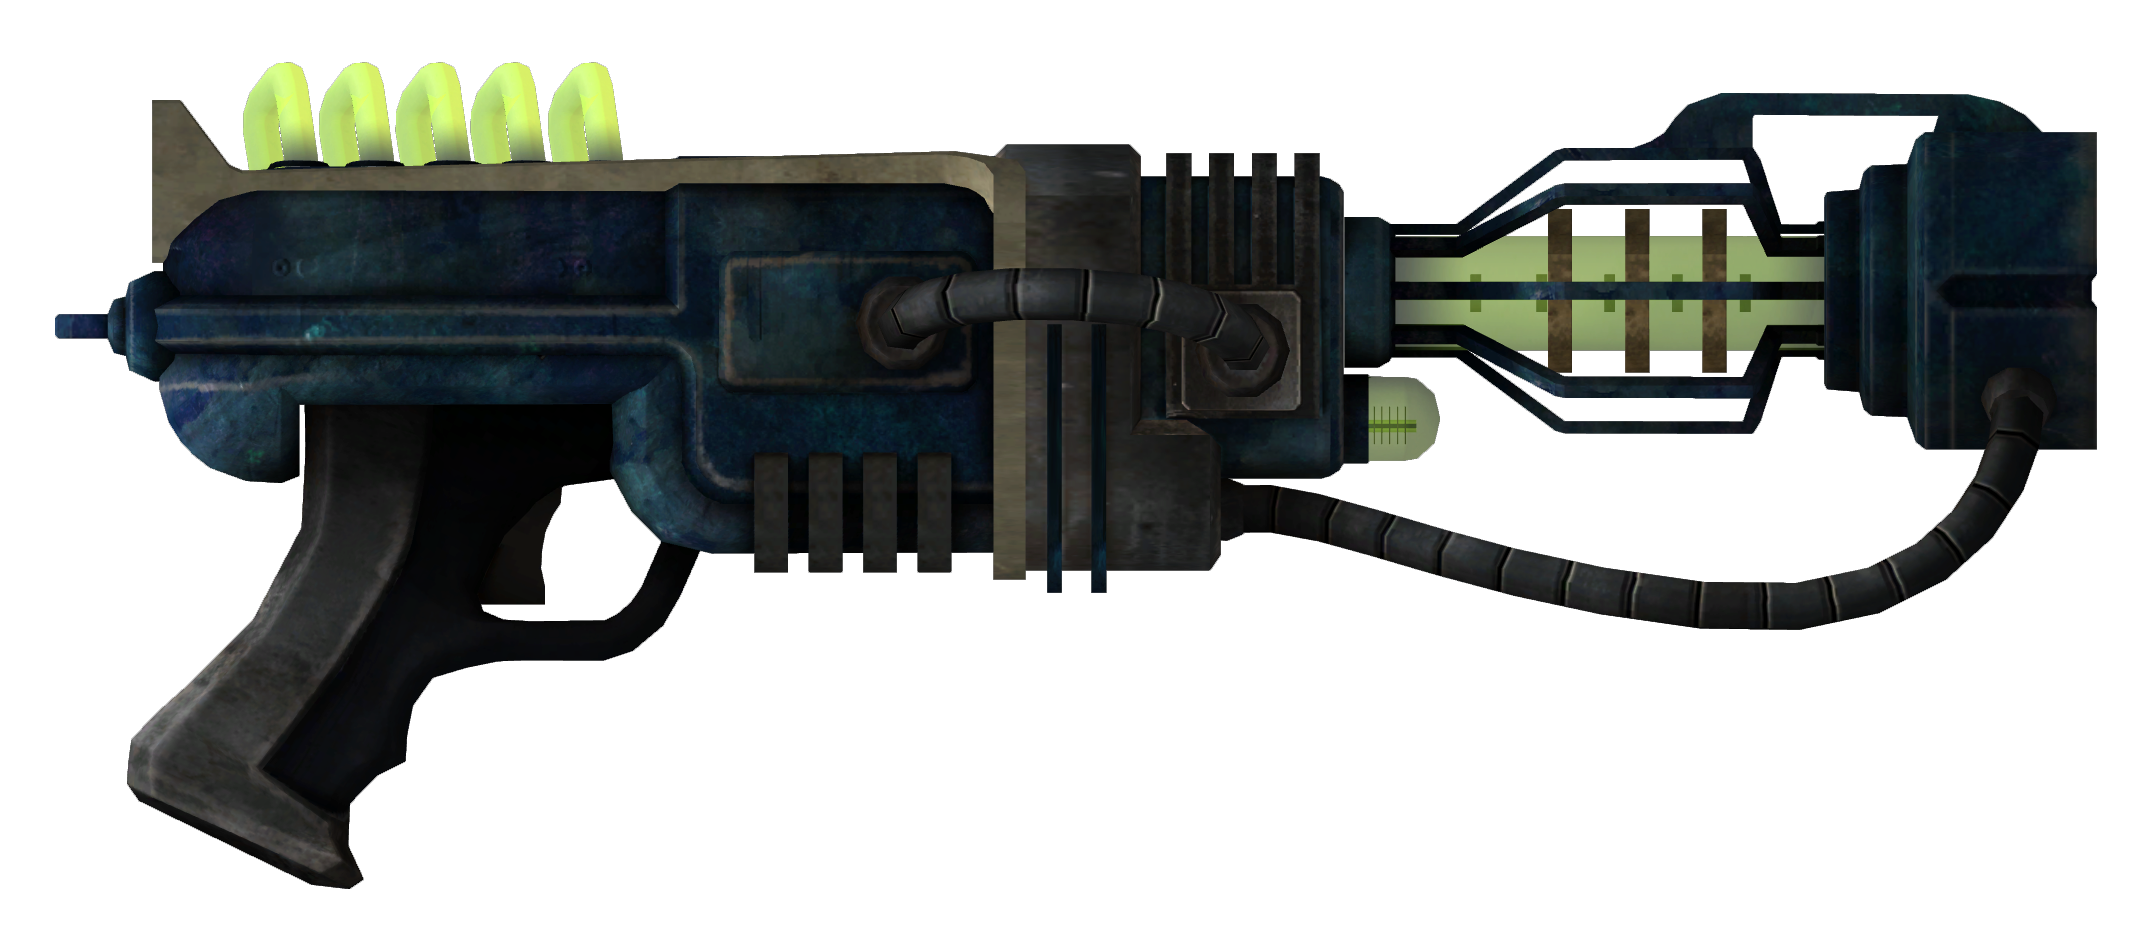 Fallout 3 Rare weapons